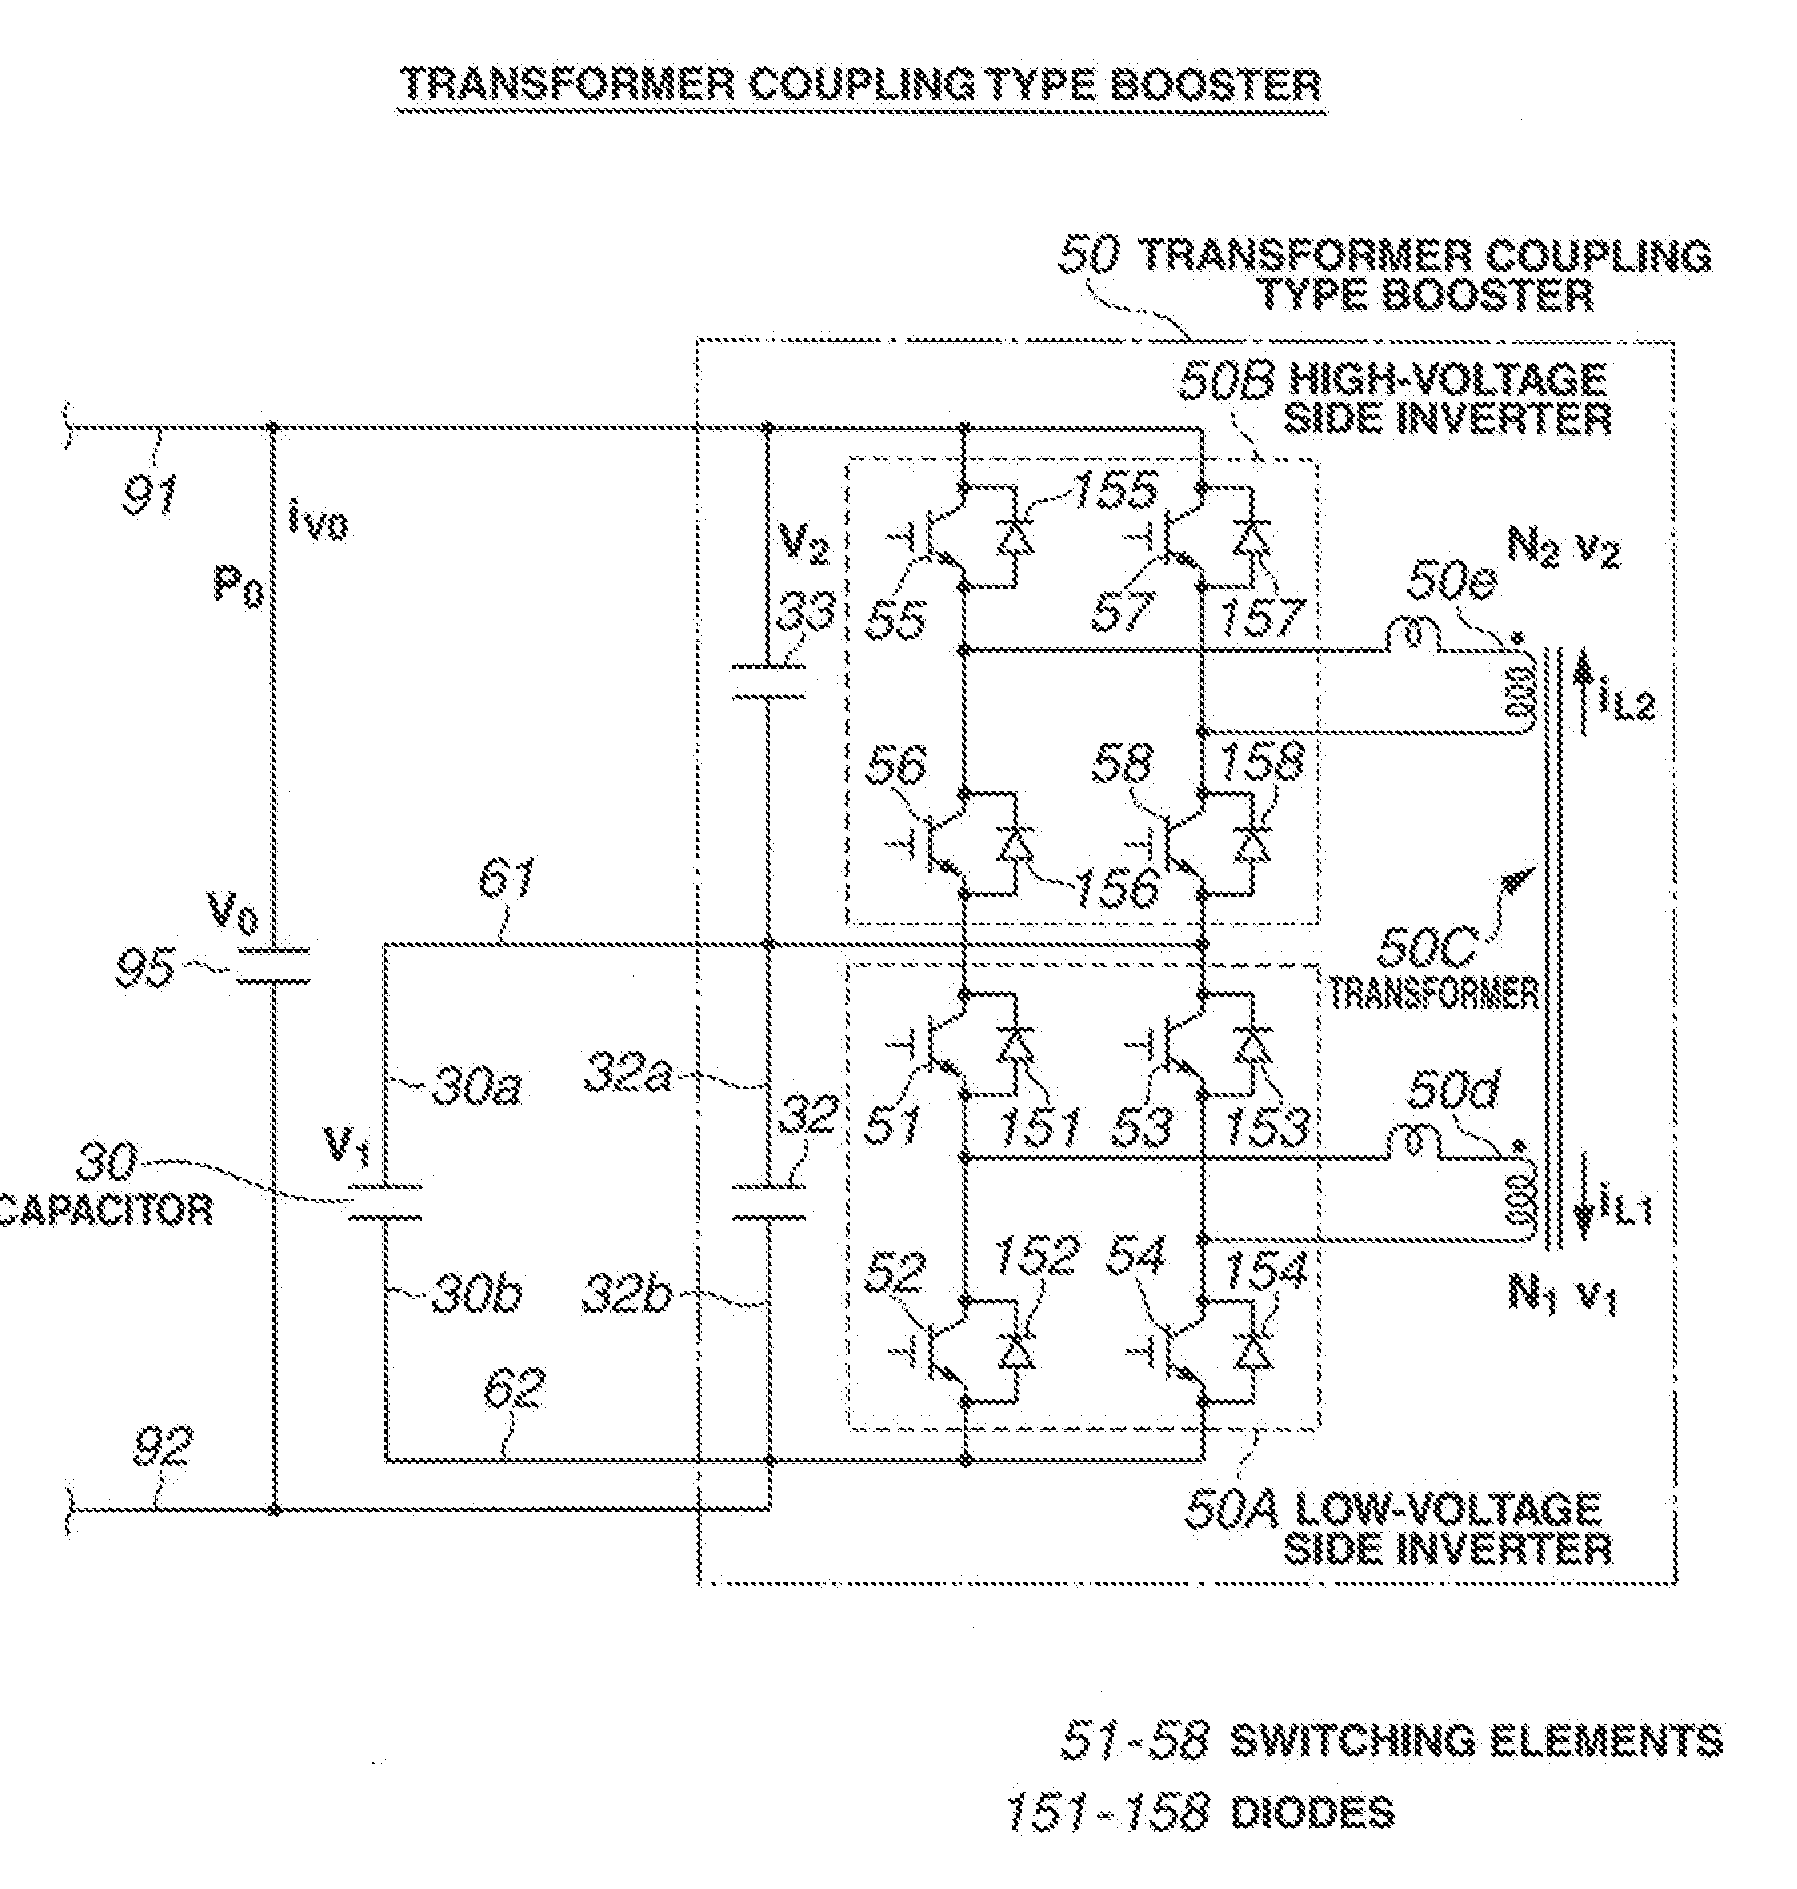 Control device of transformer coupling type booster